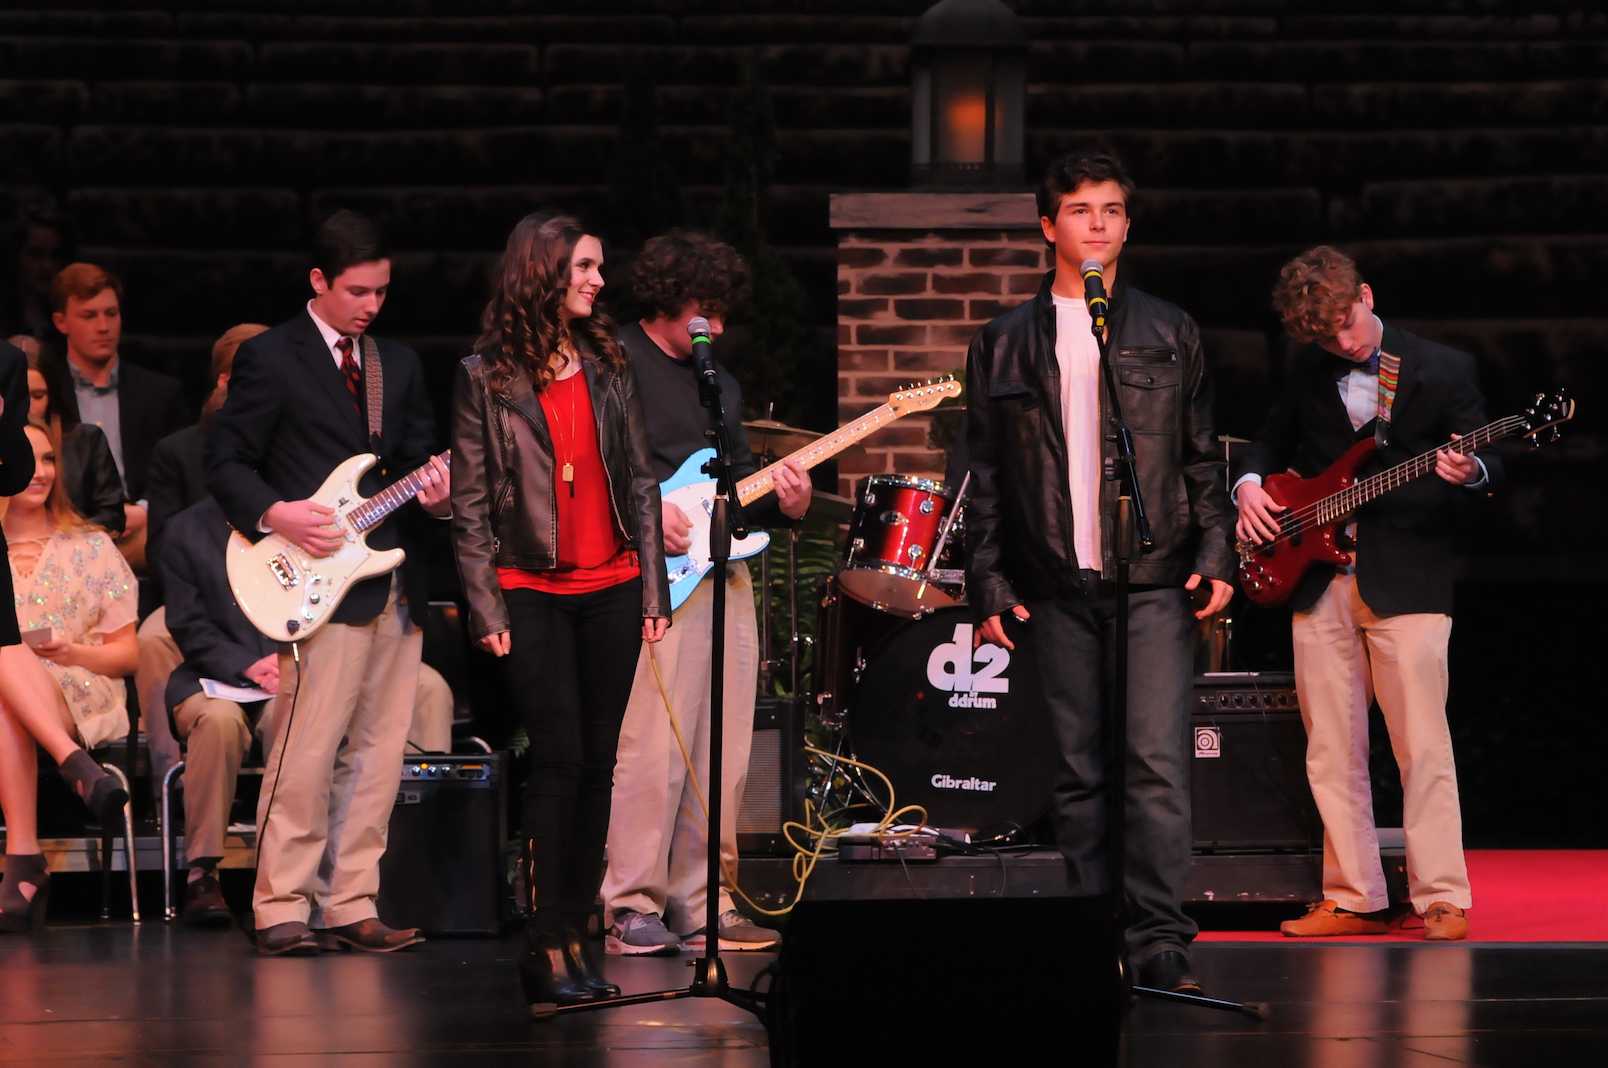 Student band, known as the Elders, performing "Grease" by Frankie Vallie. Photo courtesy of Hubert Worley Photography.